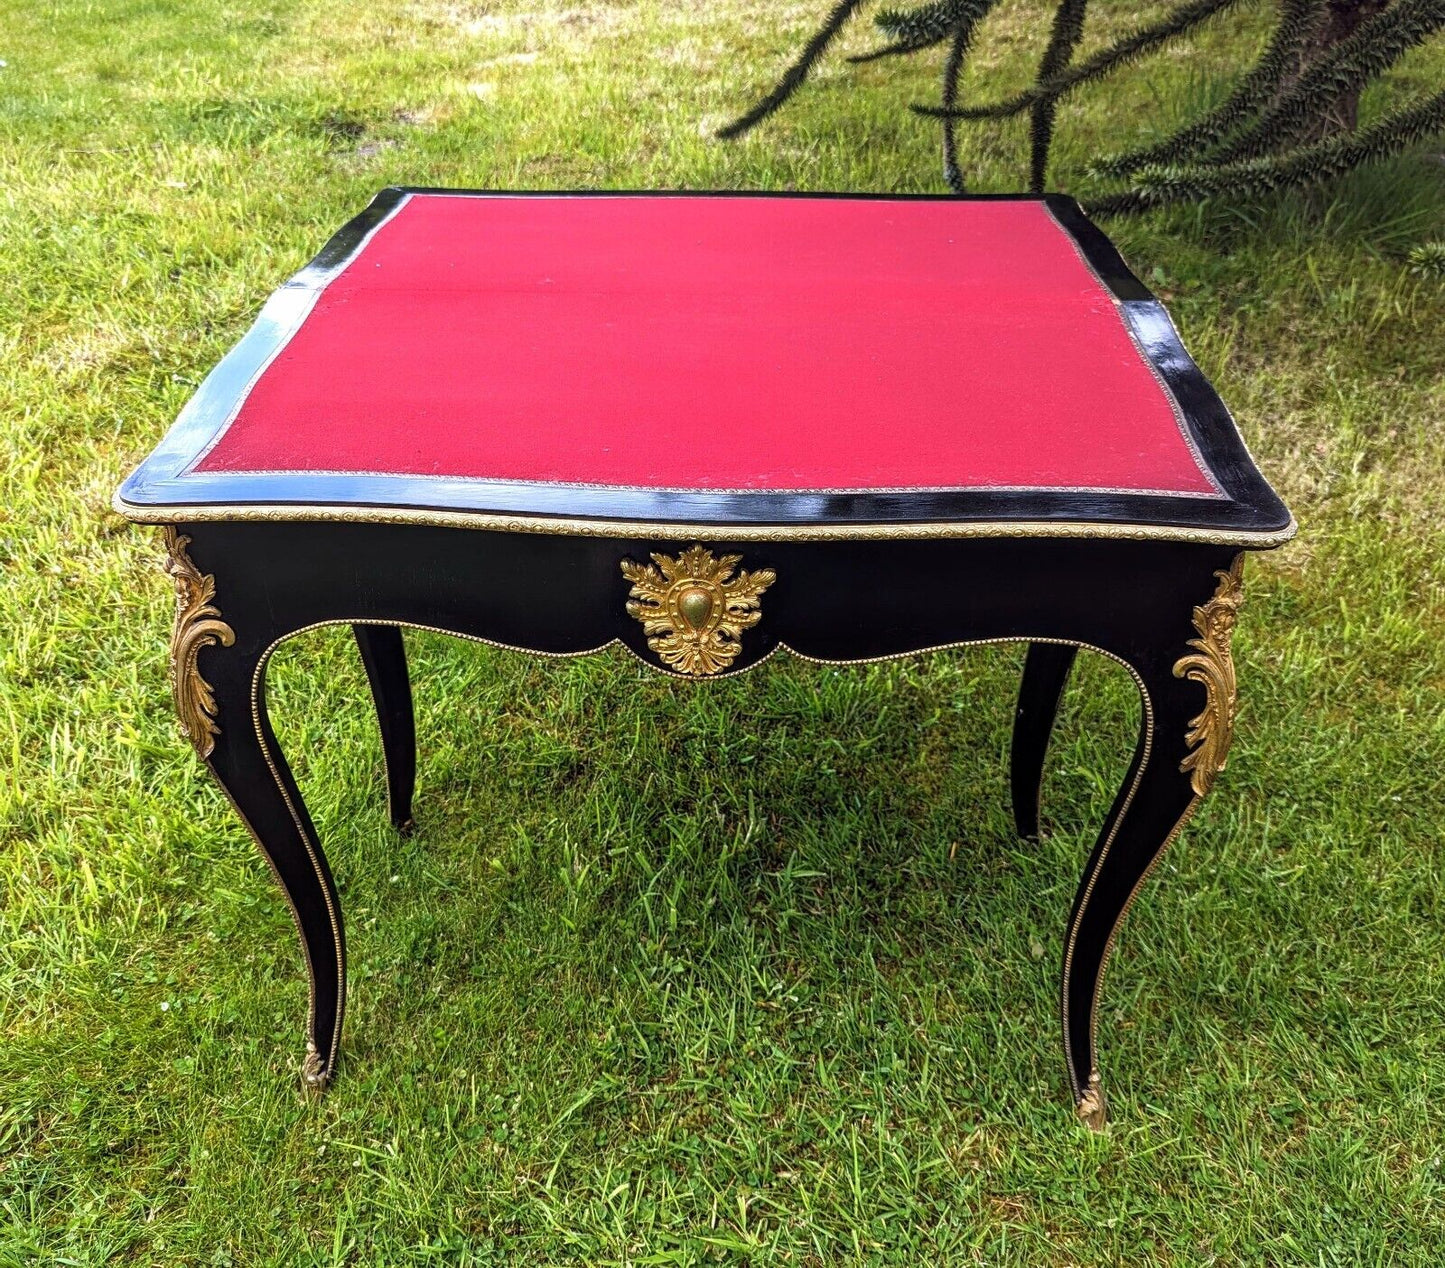 Quality Ebonised Table Gilt Ormolu From Home Of Axel Vervoordt Visual Artist.